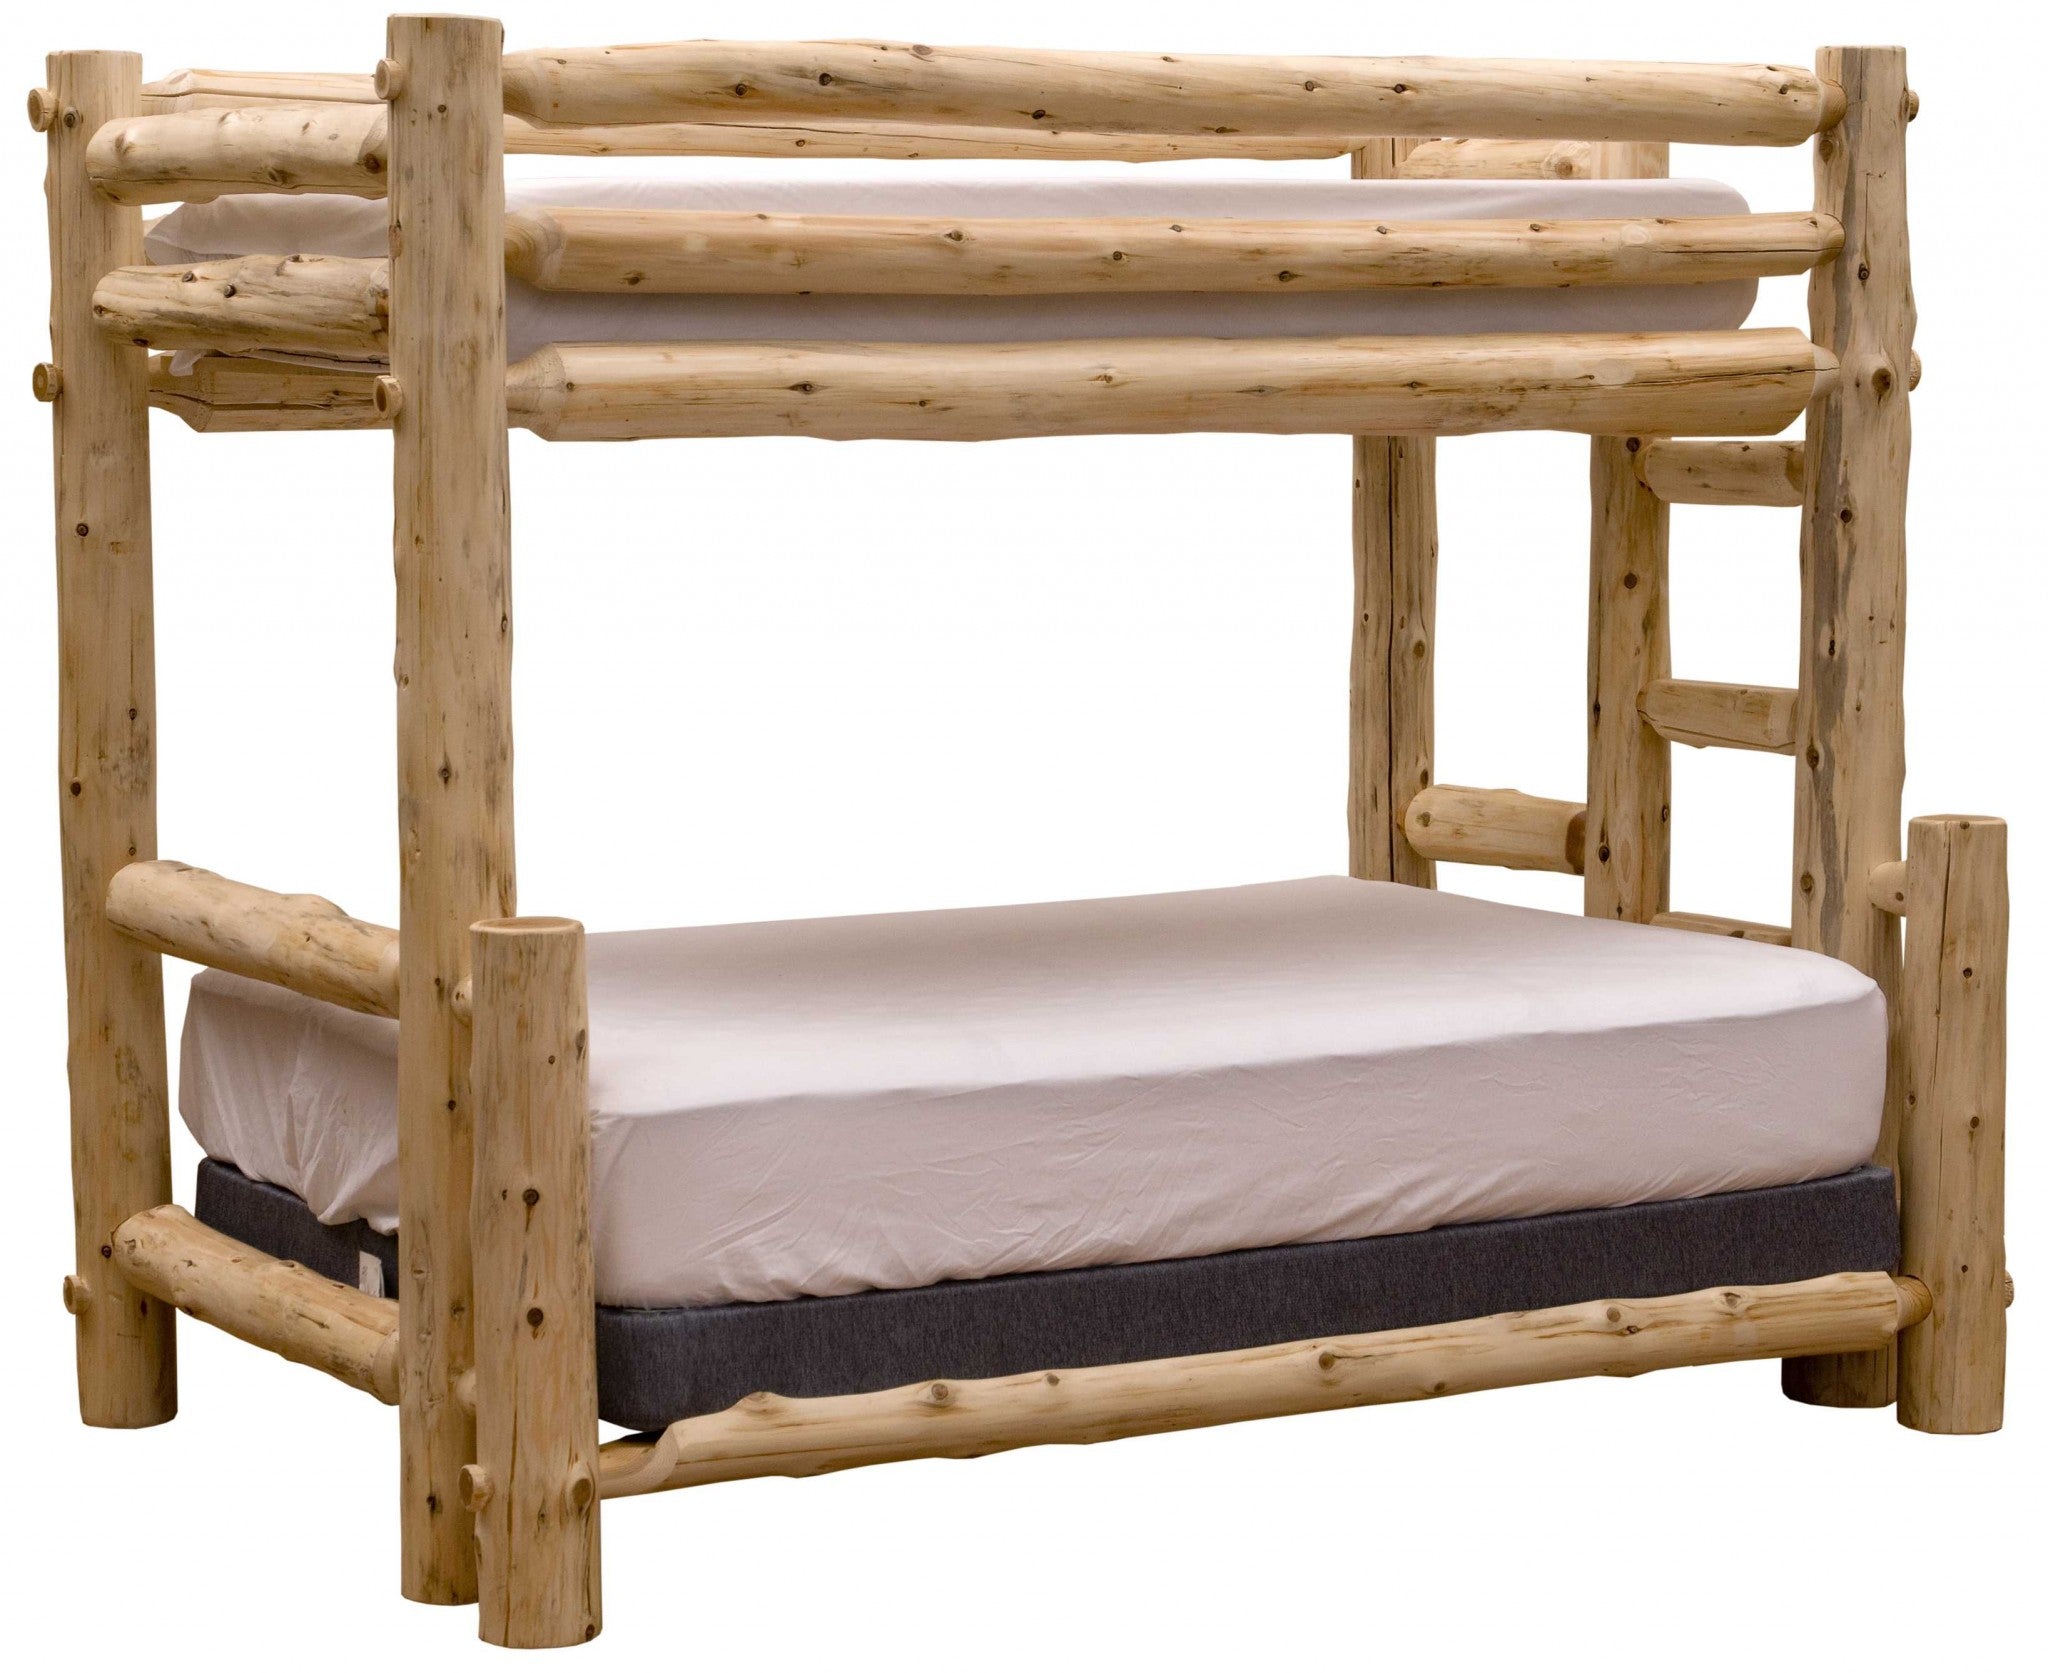 Rustic and Natural Cedar Queen and Single Ladder Left Log Bunk Bed